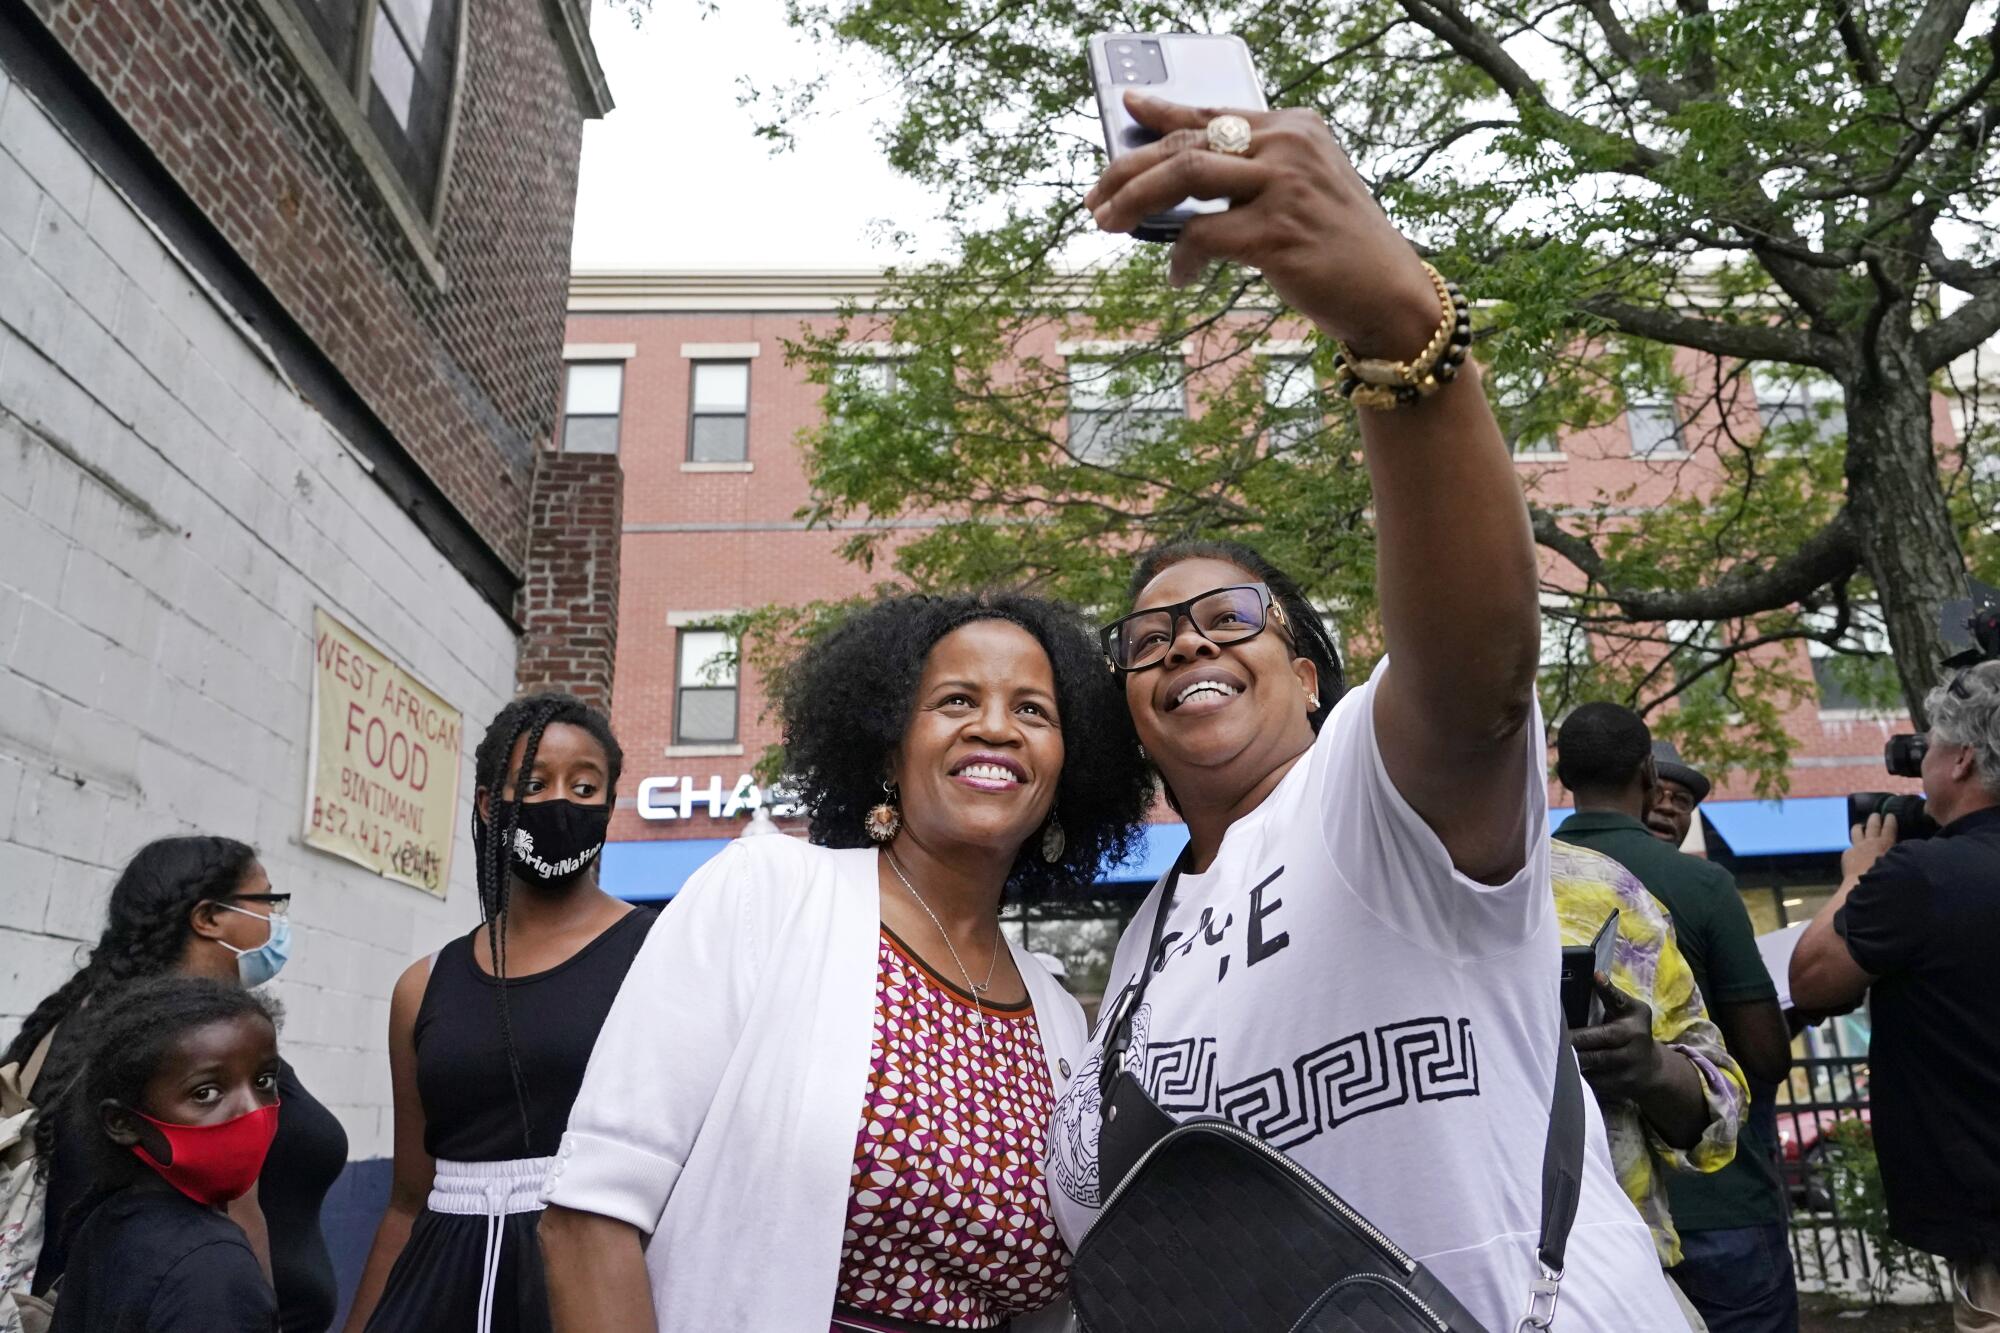 Boston's acting Mayor Kim Janey, left, takes a selfie with Mikey Miles as she meets people in Boston's Nubian Square.